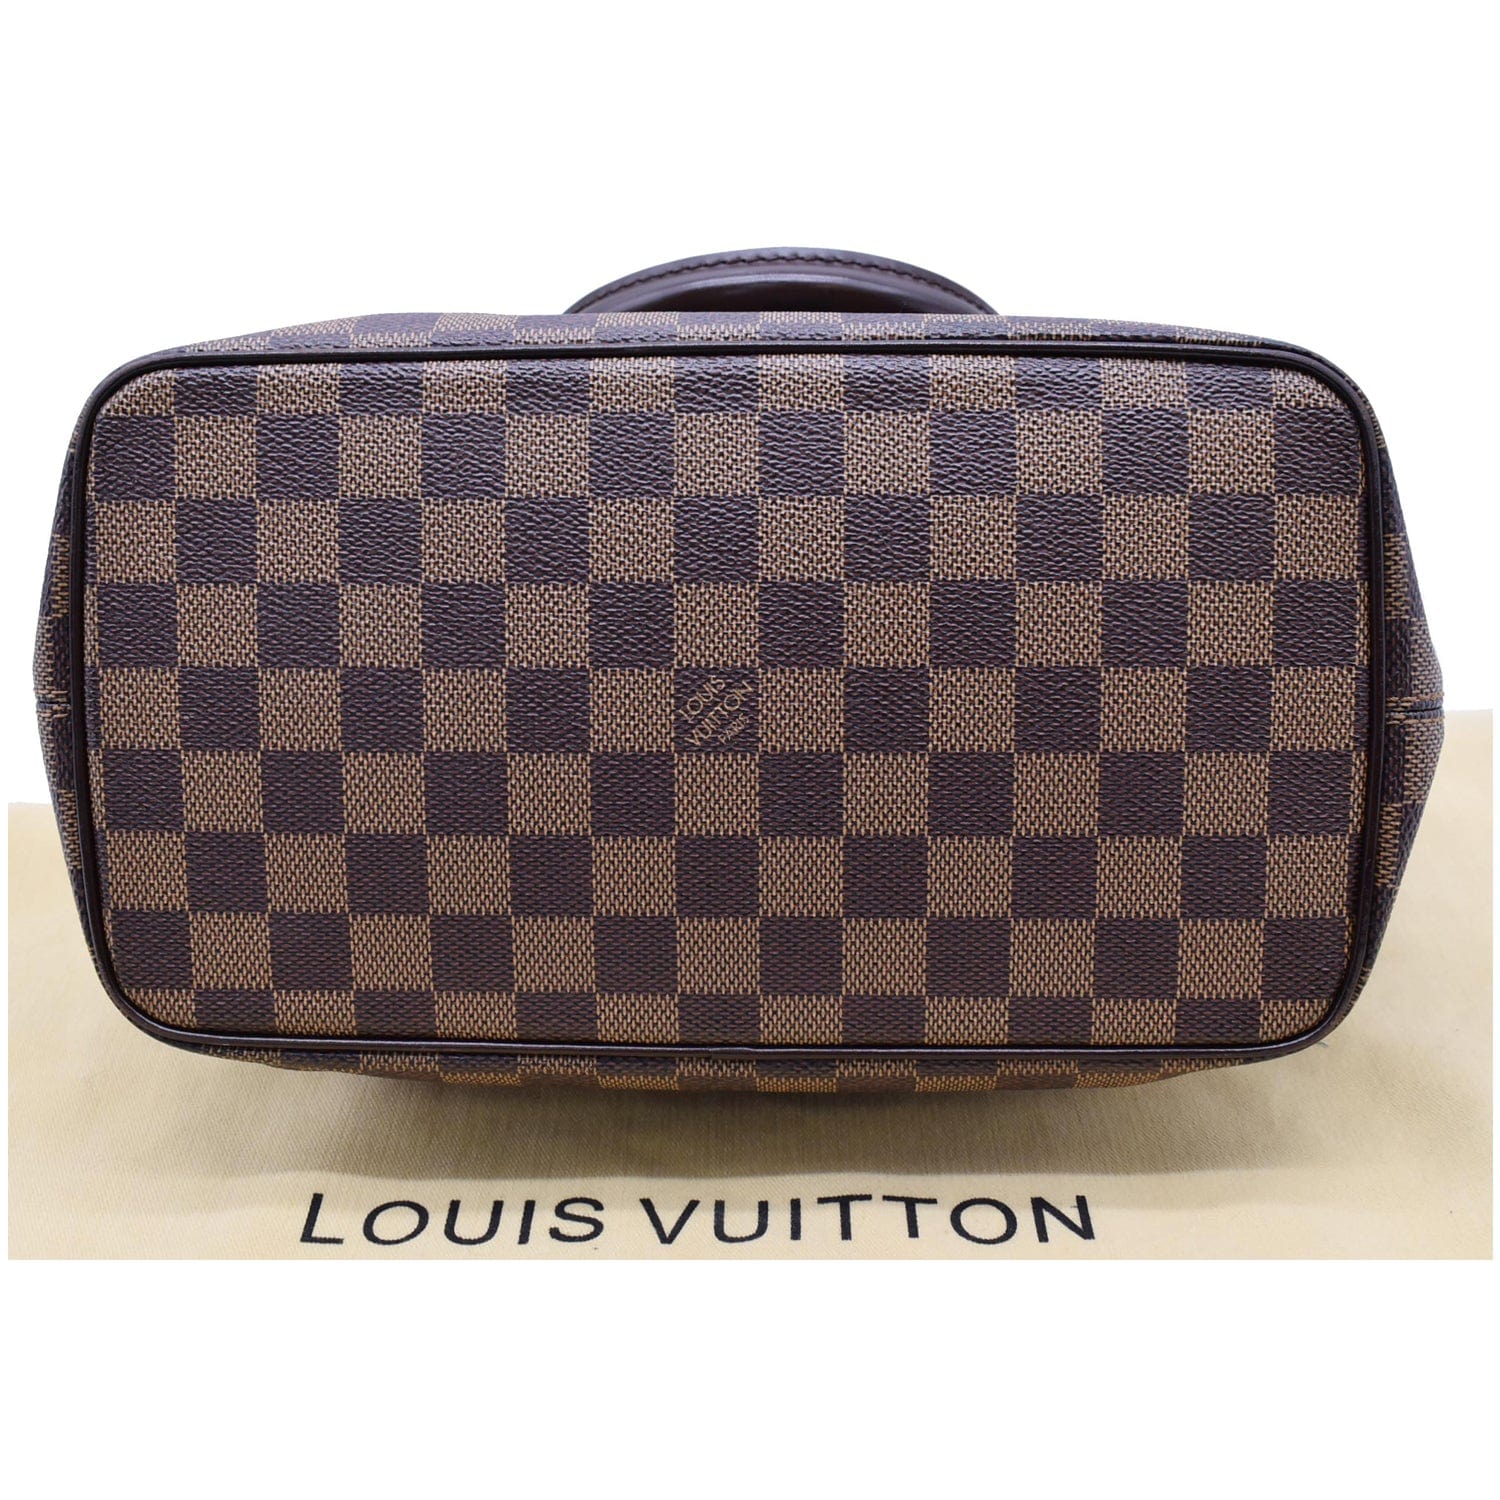 Authentic Louis Vuitton Damier Ebene Saleya Pm Tote for Sale in Lake View  Terrace, CA - OfferUp